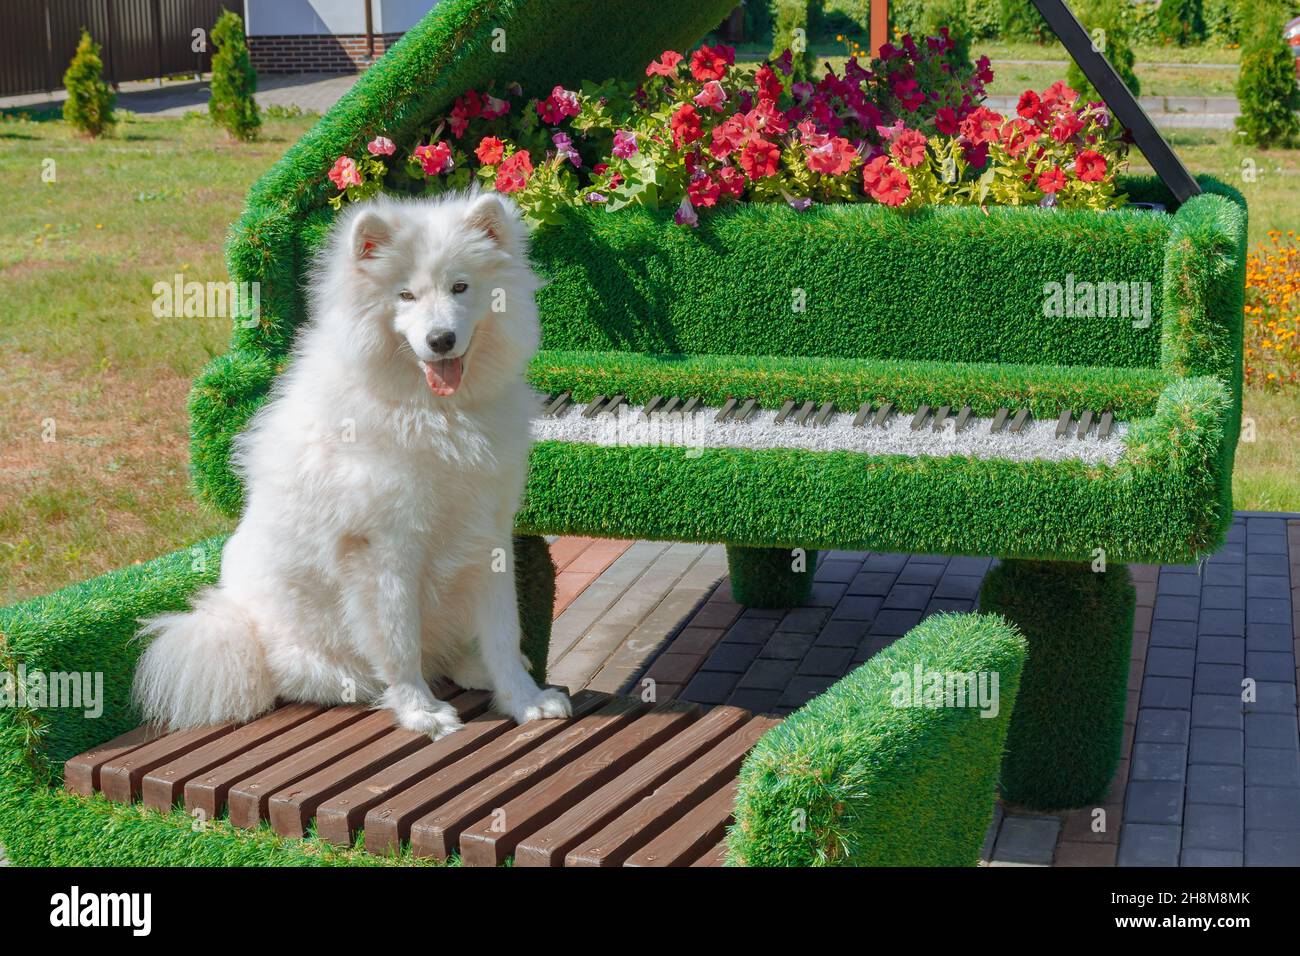 Samoyed puppy sits on a bench near a green installation with flowers Stock Photo